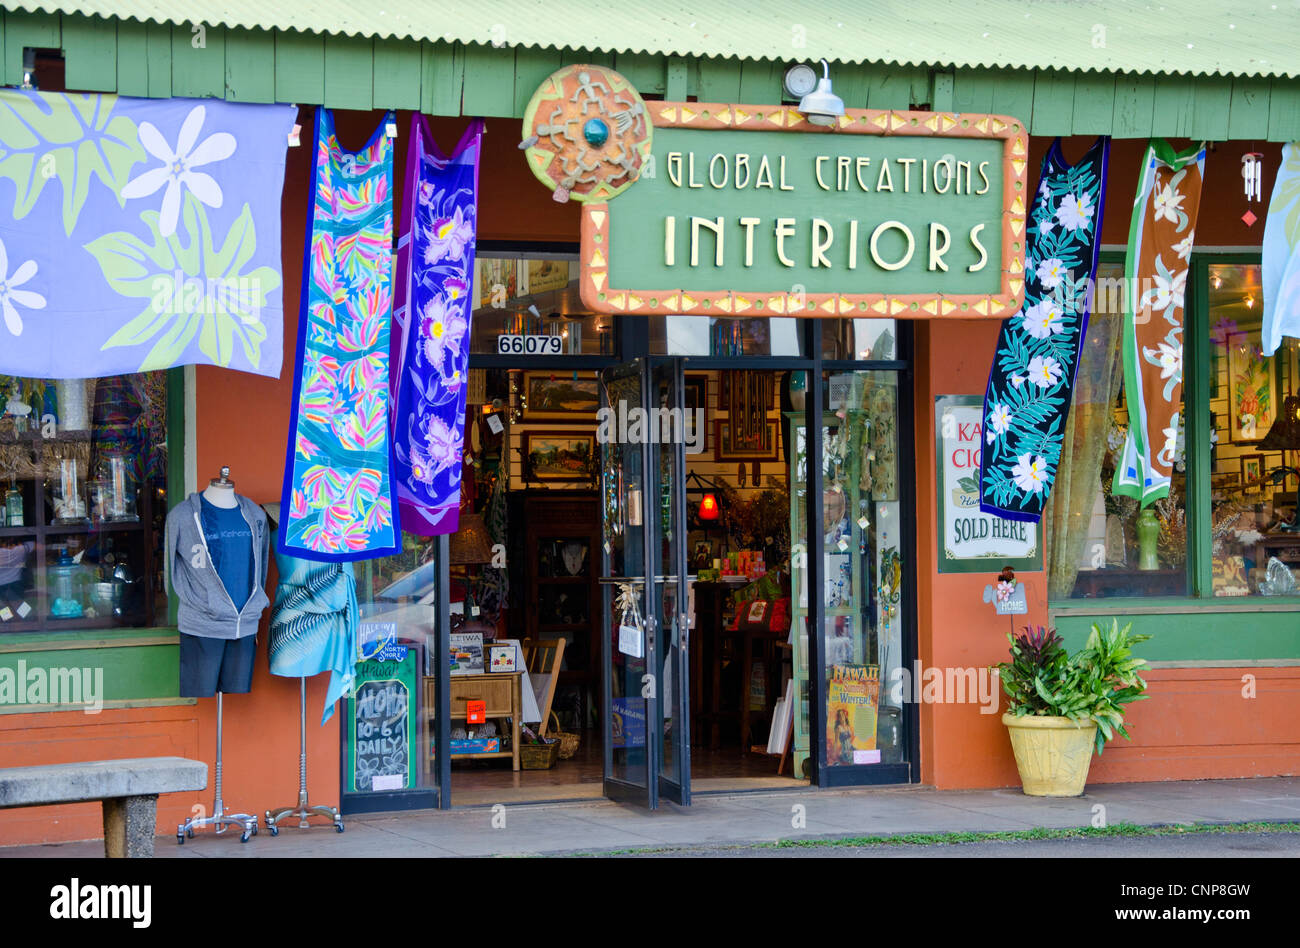 Quaint shops in the popular town of Haleiwa on the North Shore of Oahu, Hawaii, near to the famous surfing beaches. Stock Photo